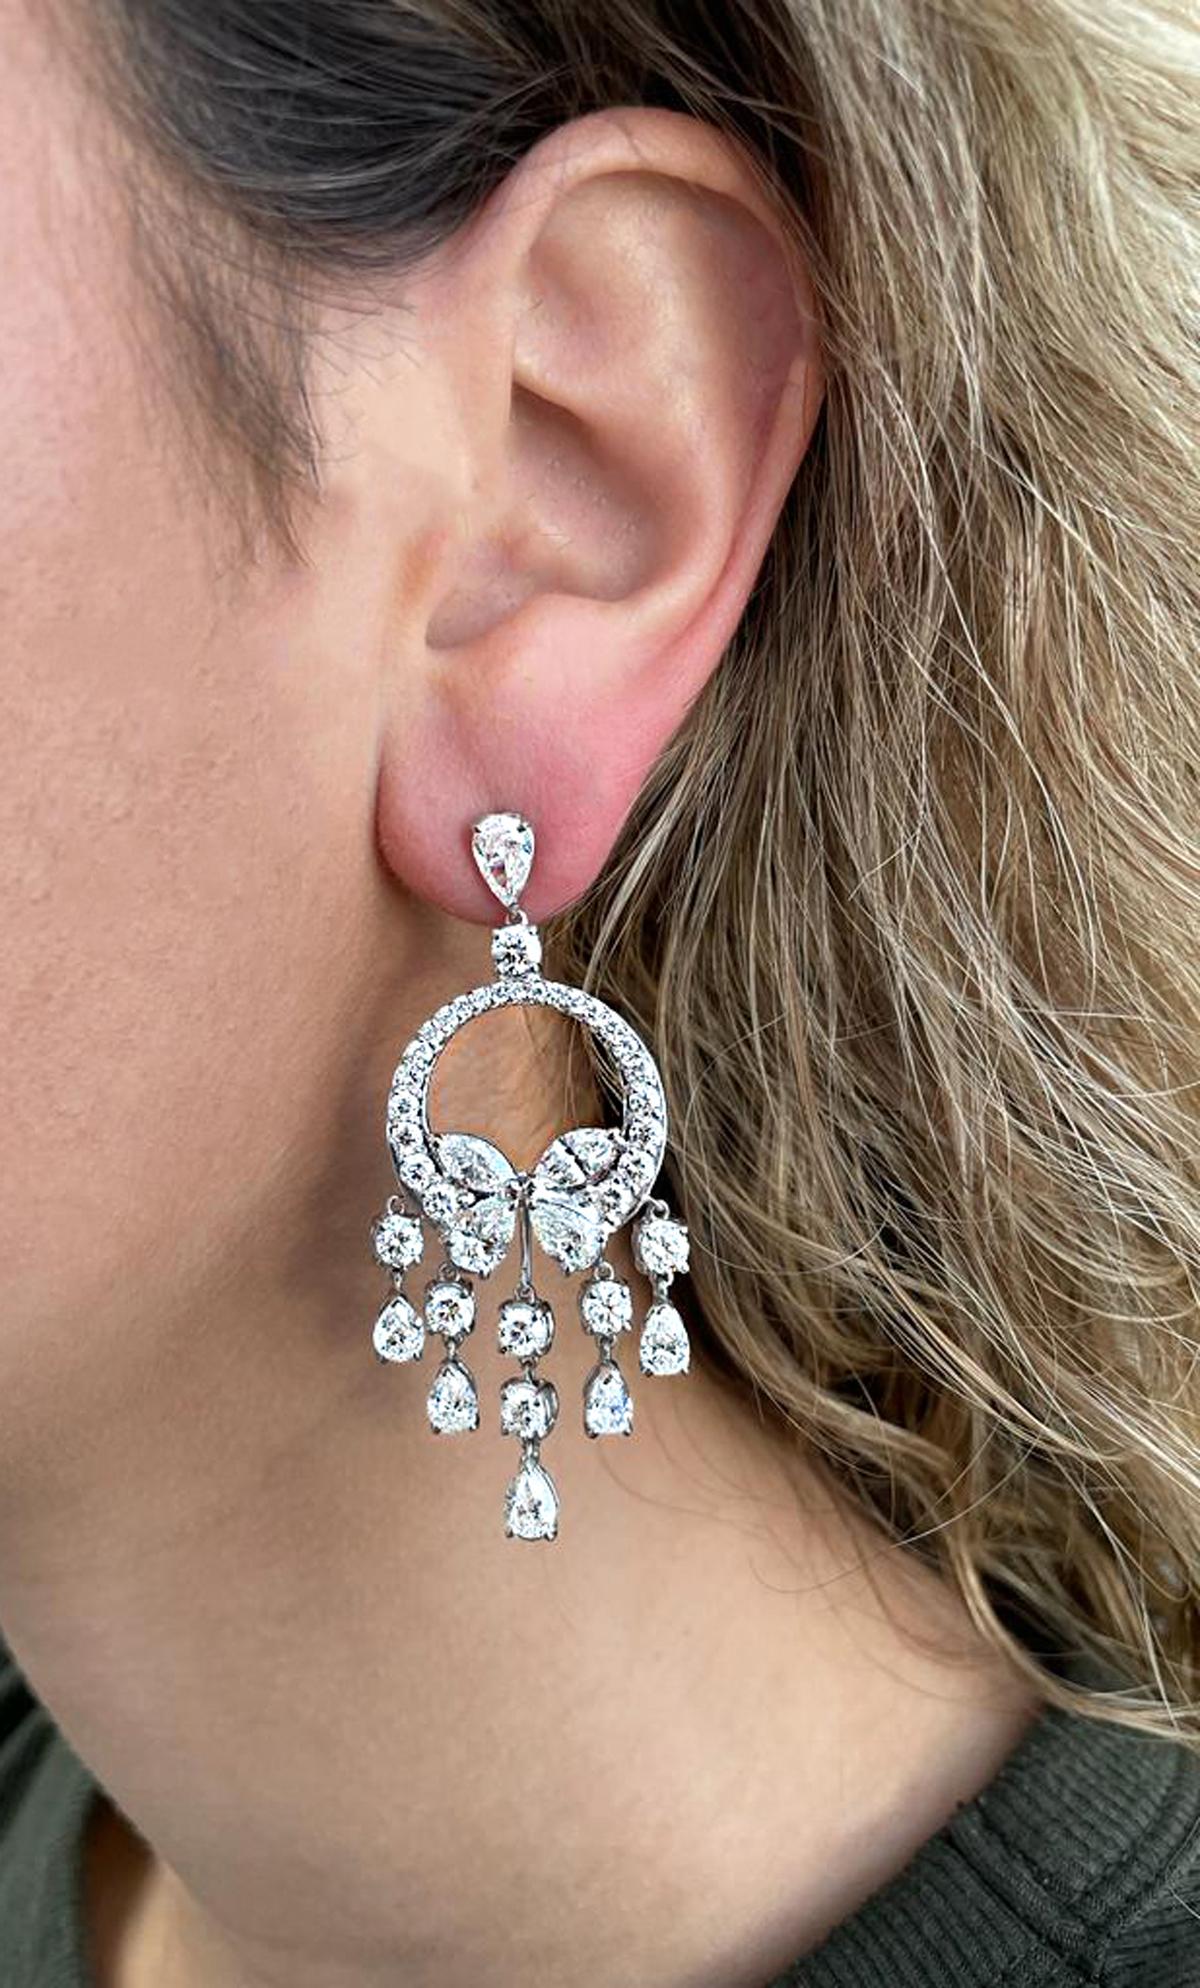 Sensational Vivid Diamonds dangle earrings crafted in 18 karat white gold, showcasing mixed cut diamonds weighing 21.01 carats total, G-H color, VS2 clarity. They measure 2 inches in length and 1 inch at their widest part and they weigh 20.3 grams.